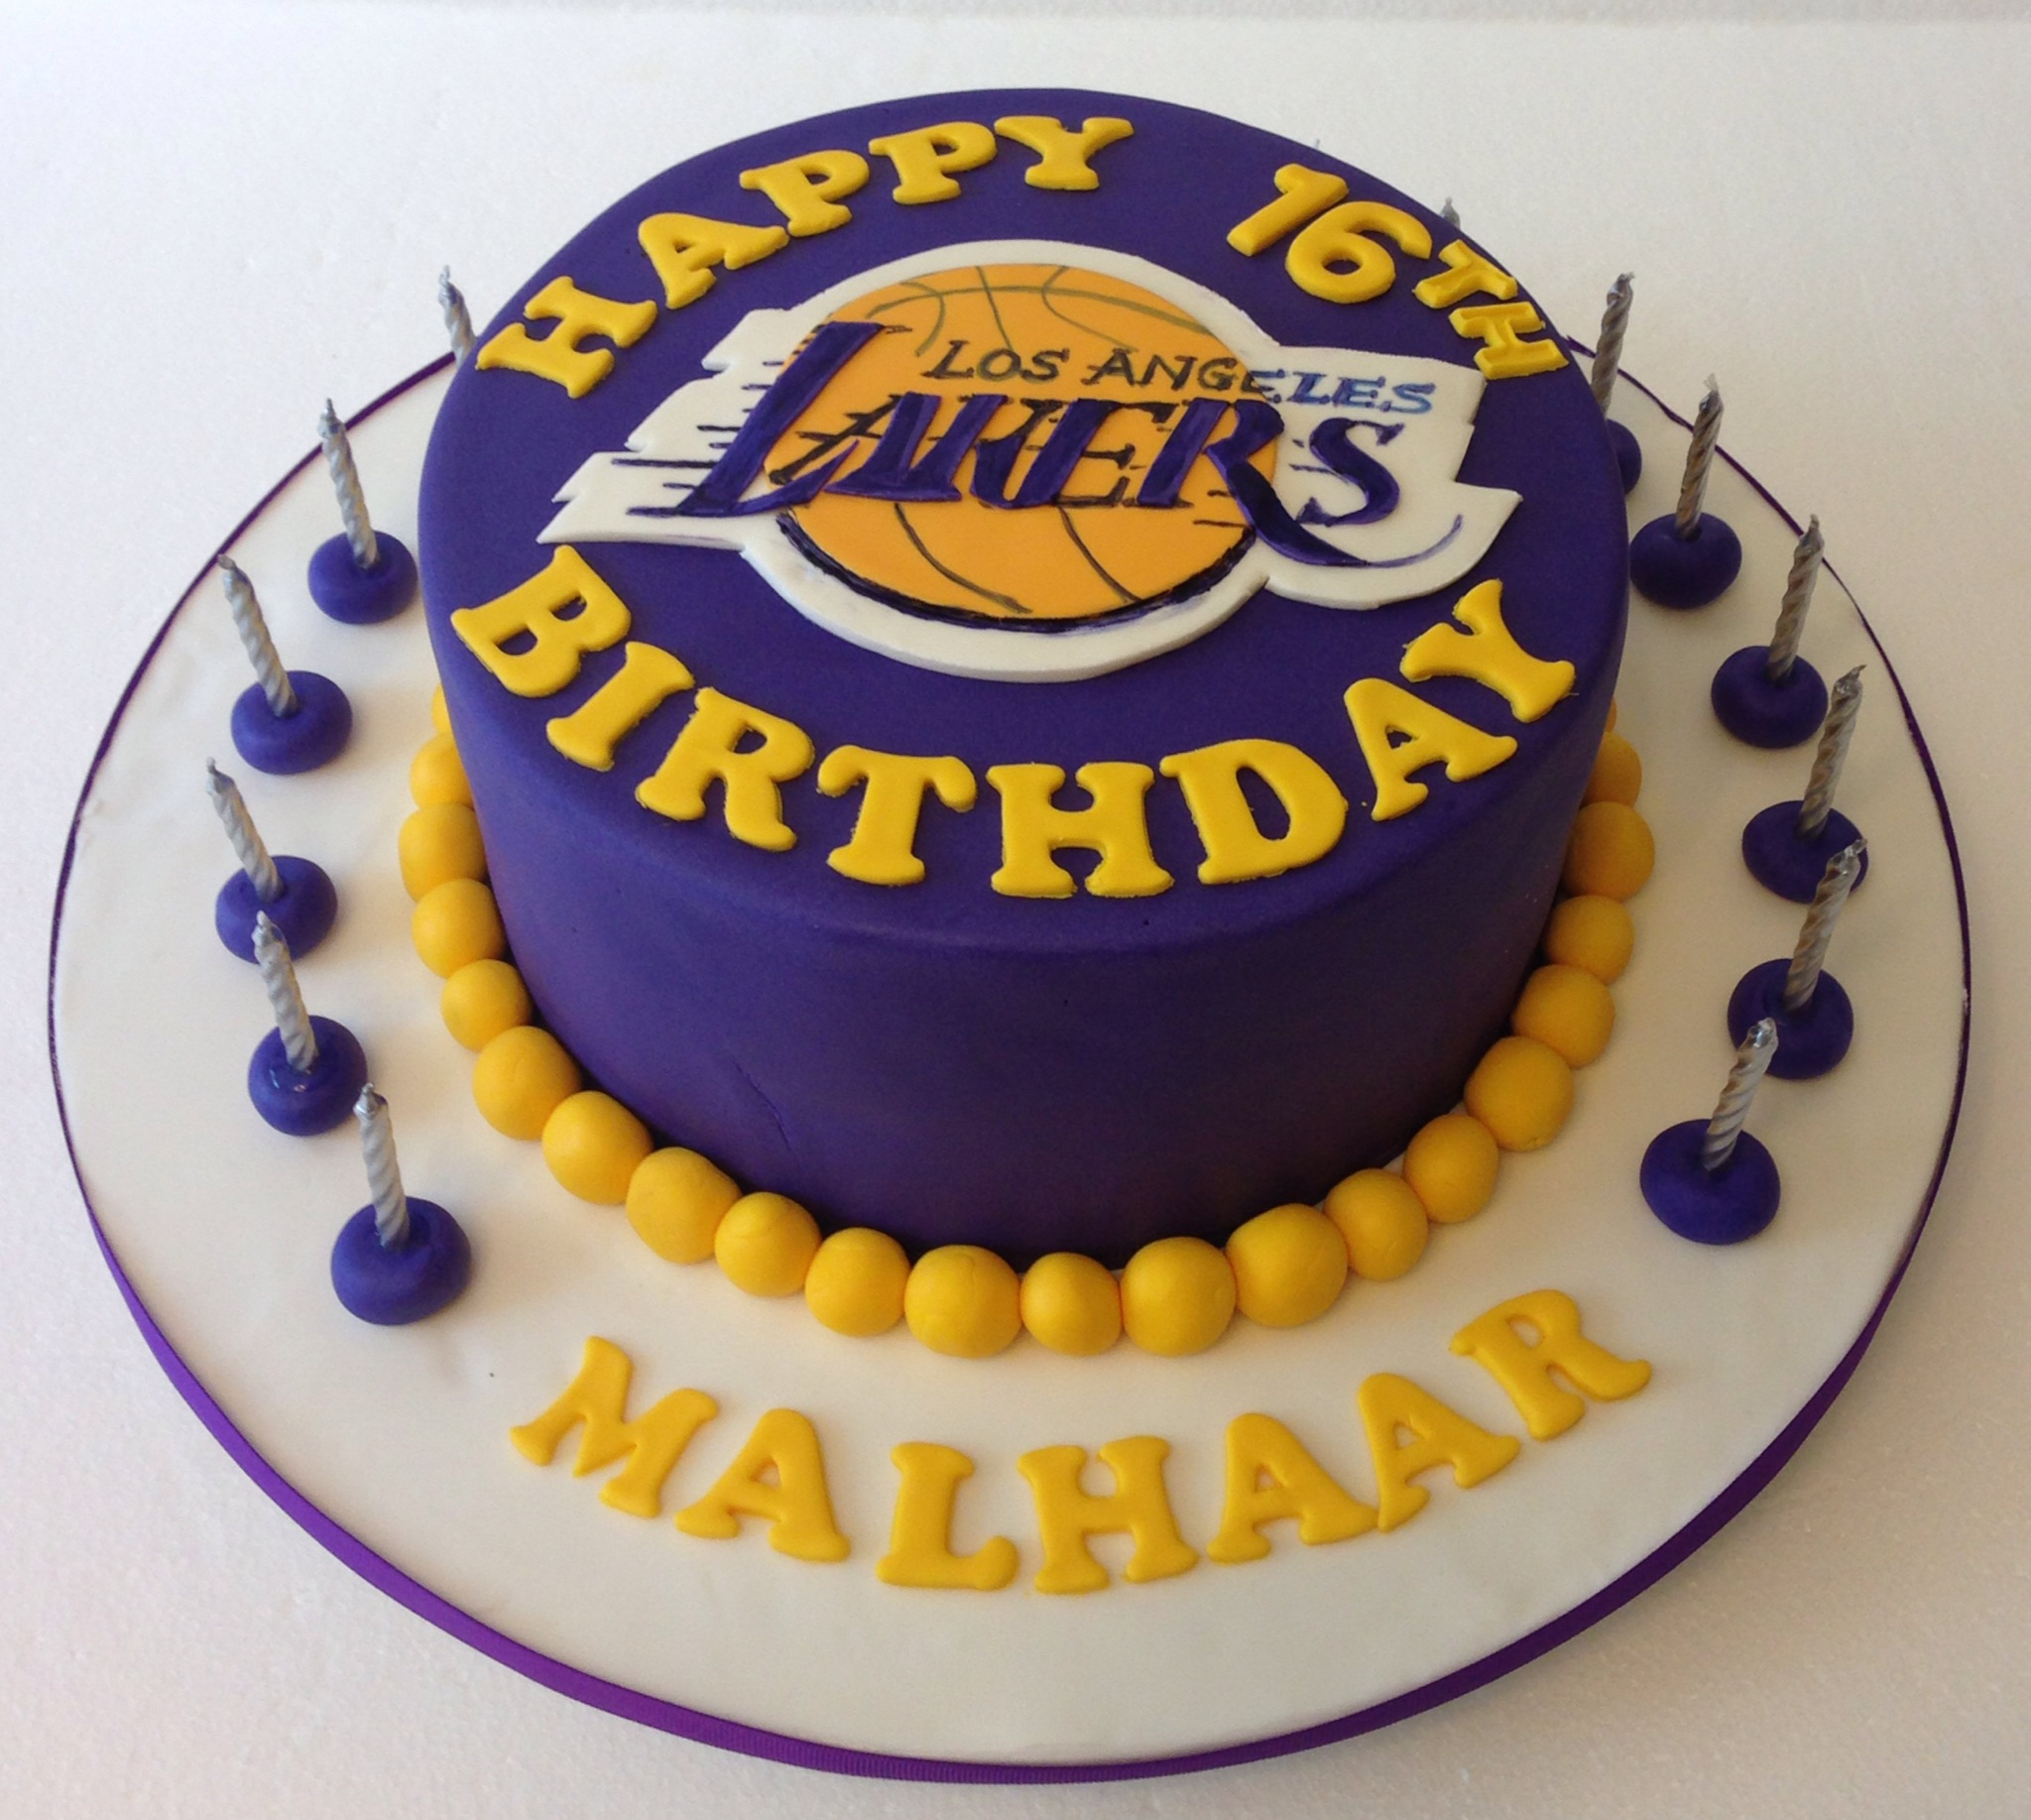 7 Los Angeles Lakers Theme Cakes Photo Lakers Birthday.